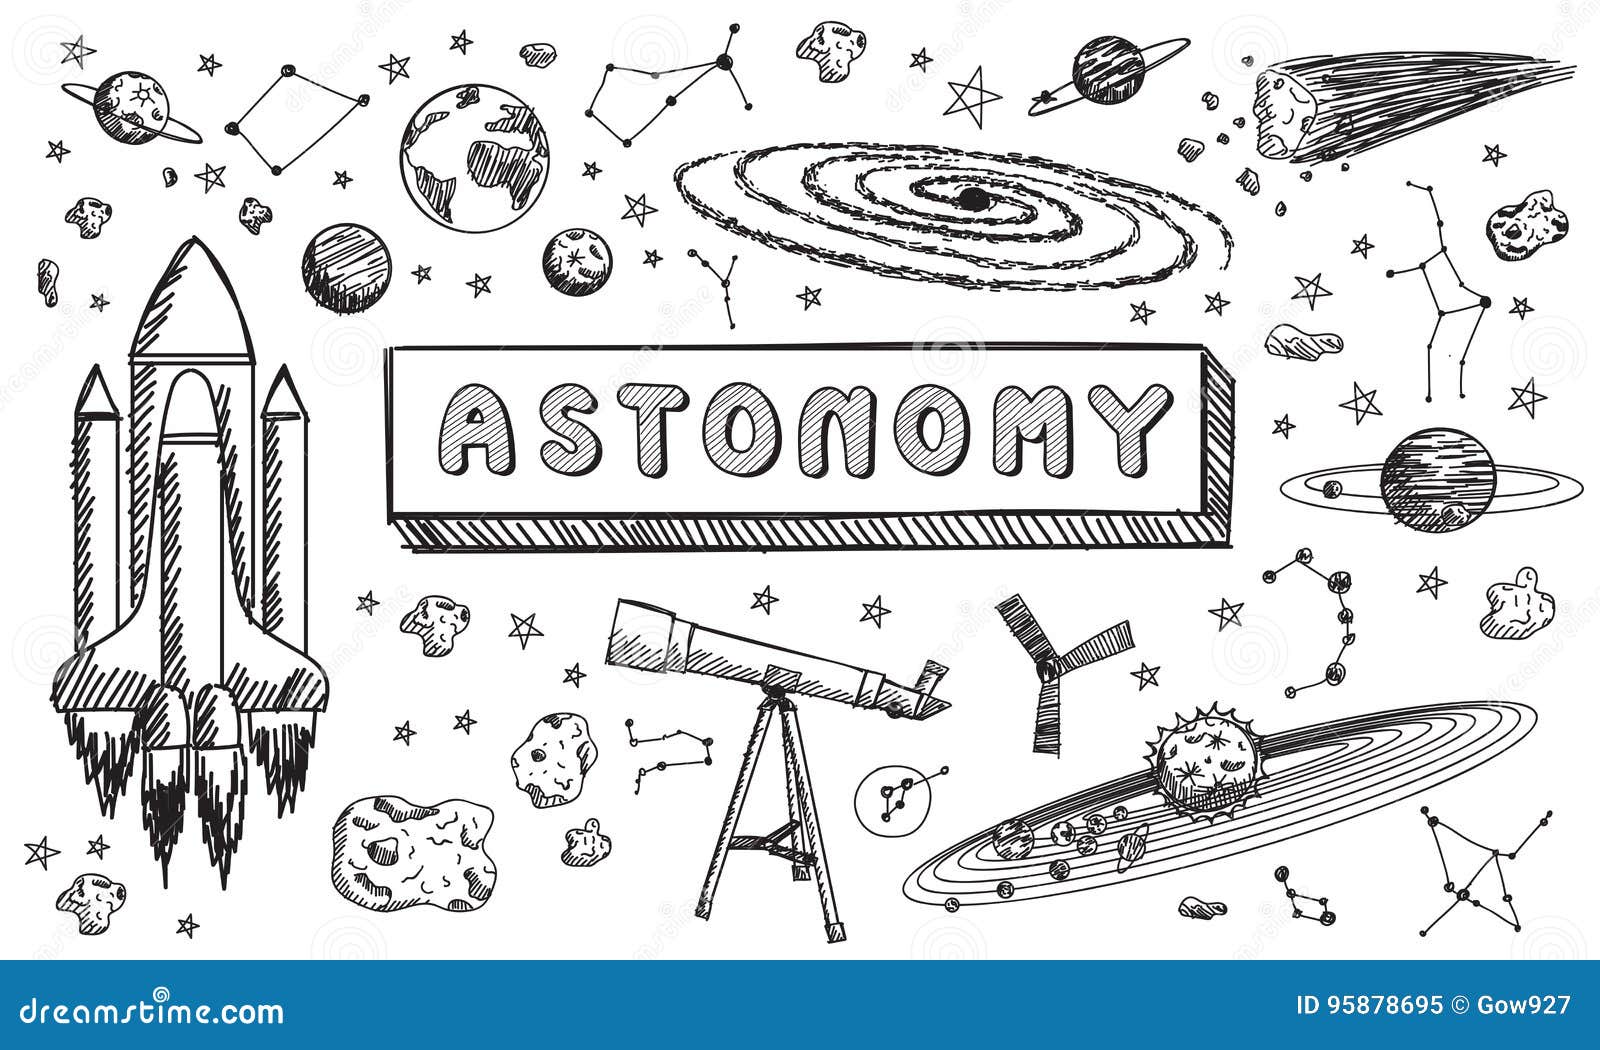 Astronomy and observatory sketches on paper notes Vector Image